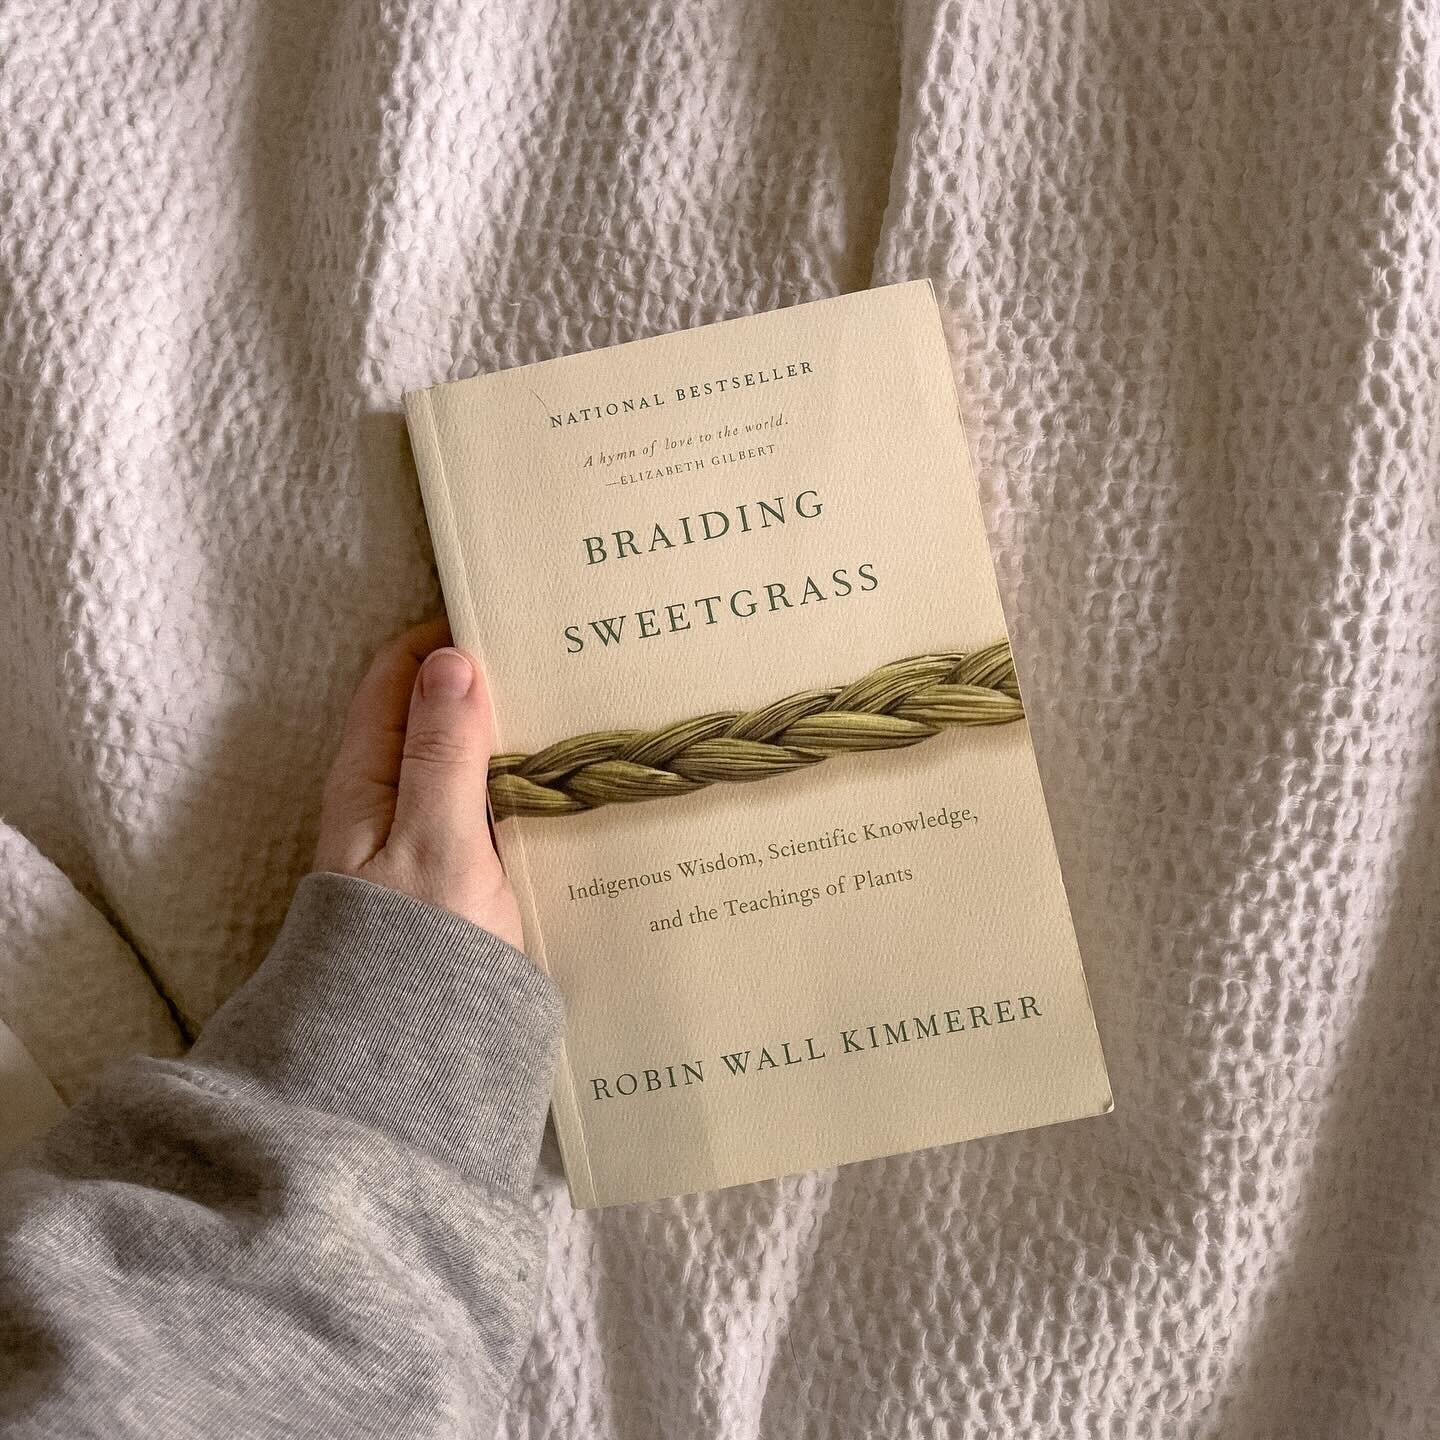 My goal in 2024 is to post on this page at least once a week 😅 there&rsquo;s lots of new people here so hello!! 

Our December book is Braiding Sweetgrass by Robin Wall Kimmerer, we&rsquo;ll be meeting in person this Friday and choosing the books fo